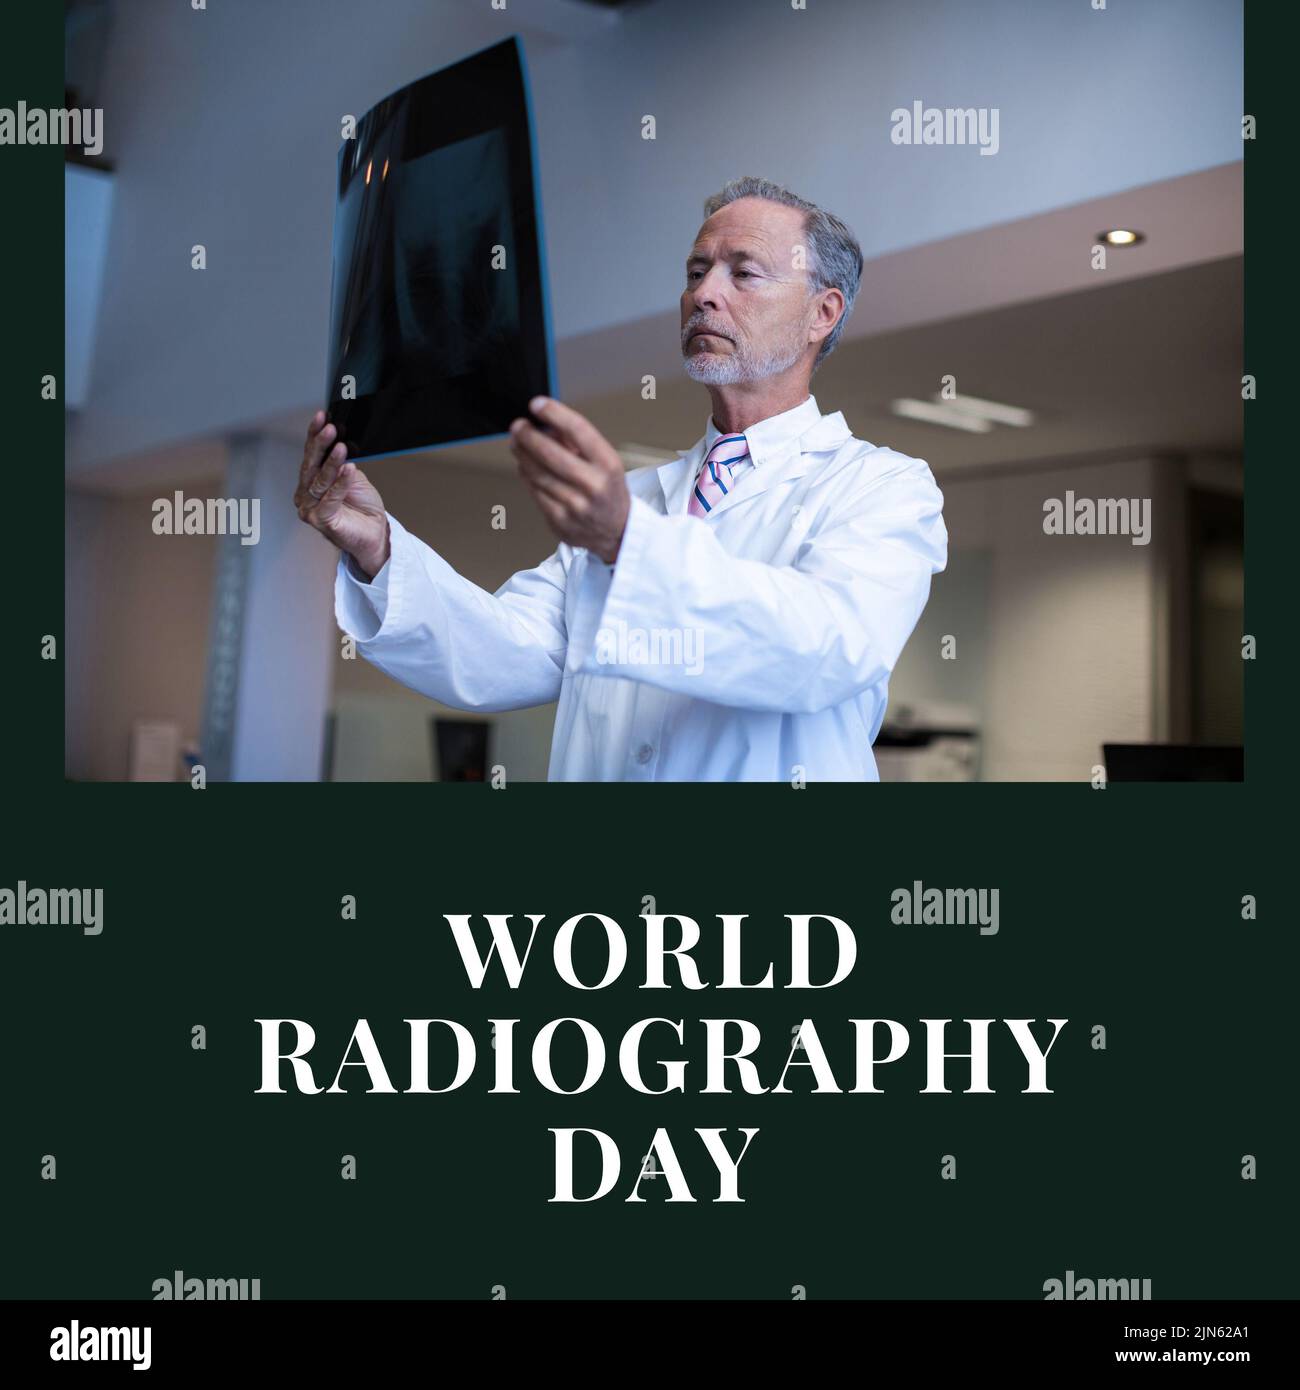 Composition of world radiography day text over caucasian male doctor with xray Stock Photo